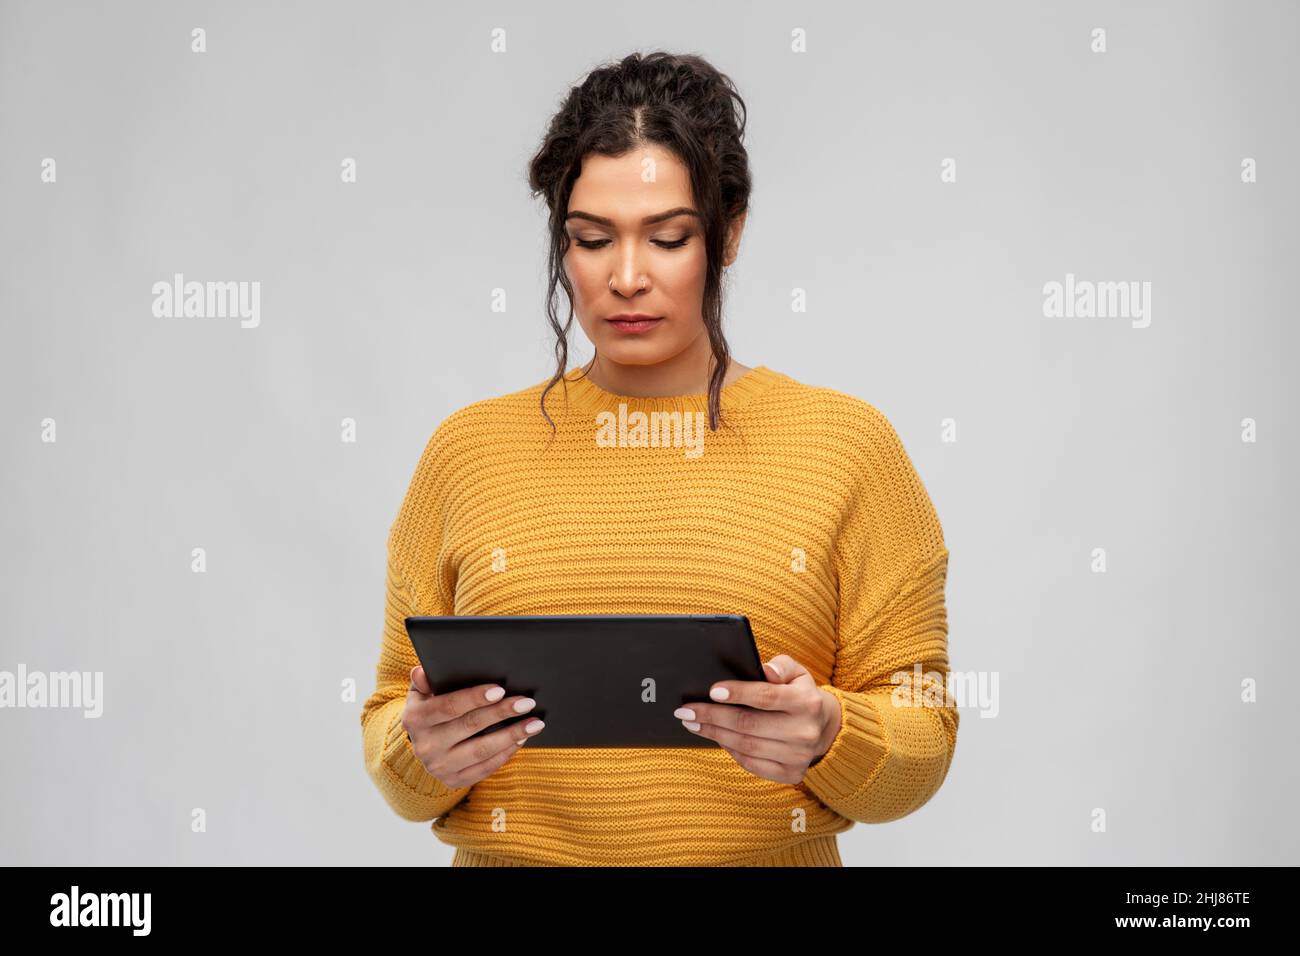 serious young woman using tablet pc computer Stock Photo